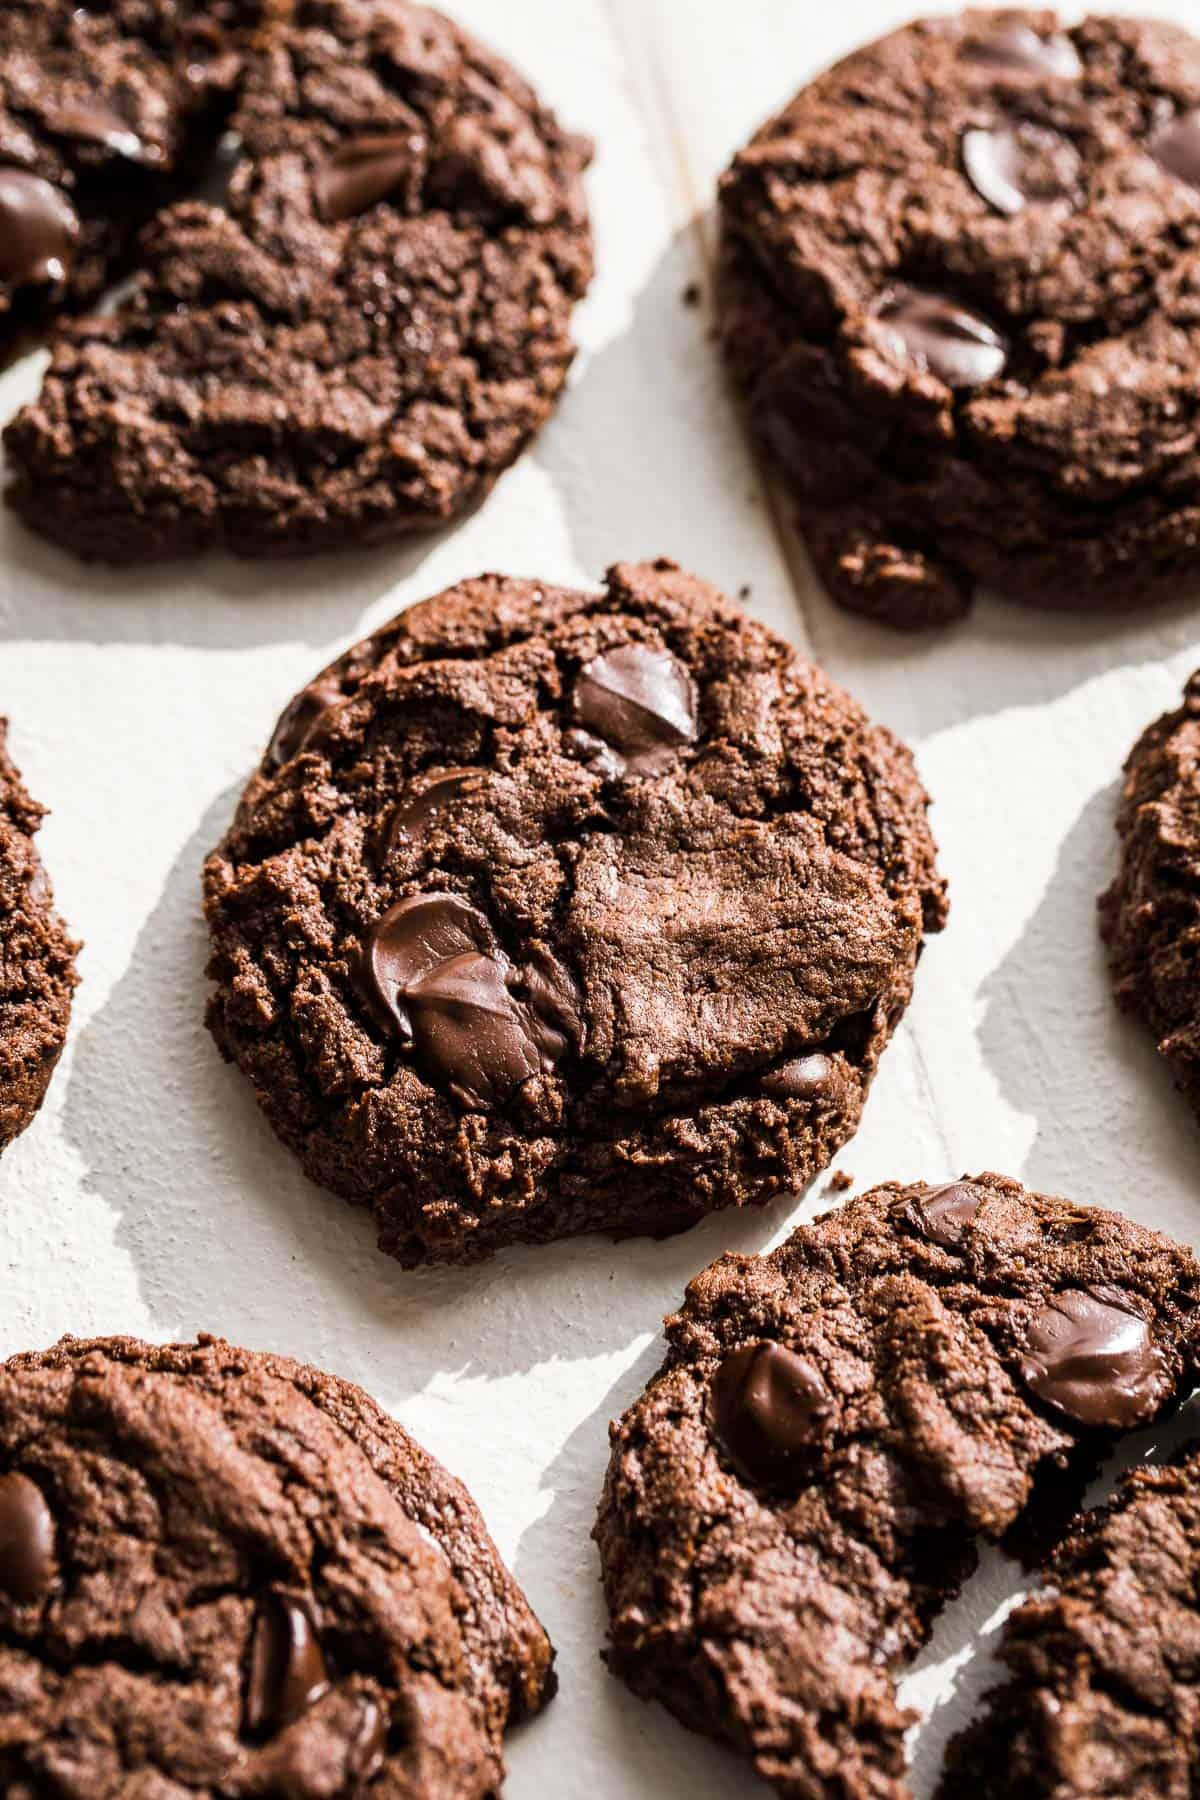 Chocolate almond butter cookies on a white background with one cookie broken in half.